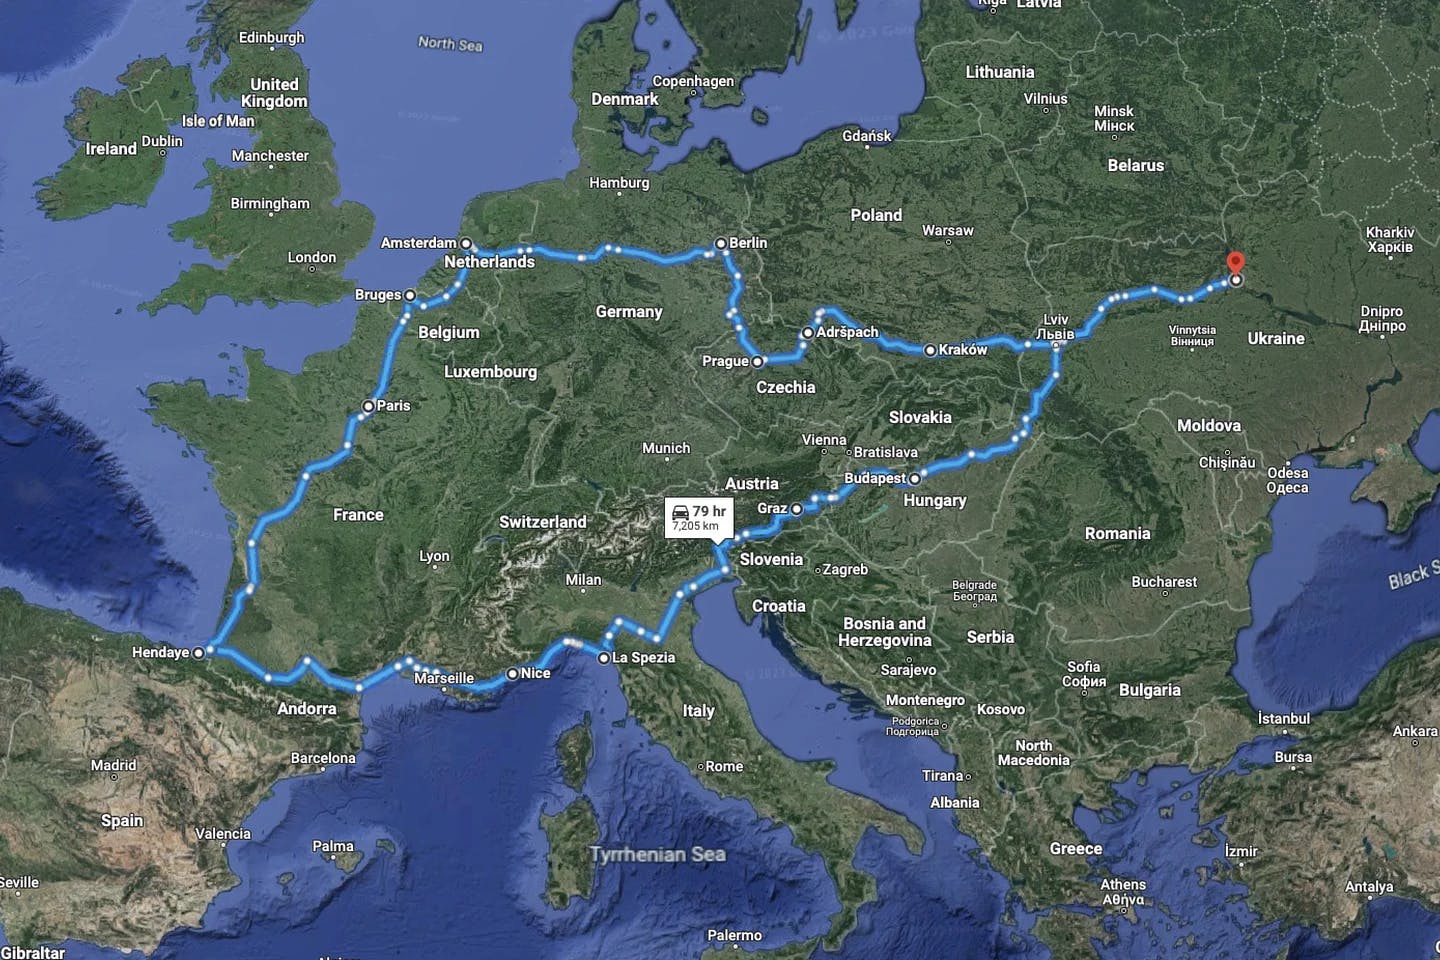 Road trip in 2021: around 10k km, 10 counntries over 6 weeks, from Ukraine to Atlantic Ocean and back